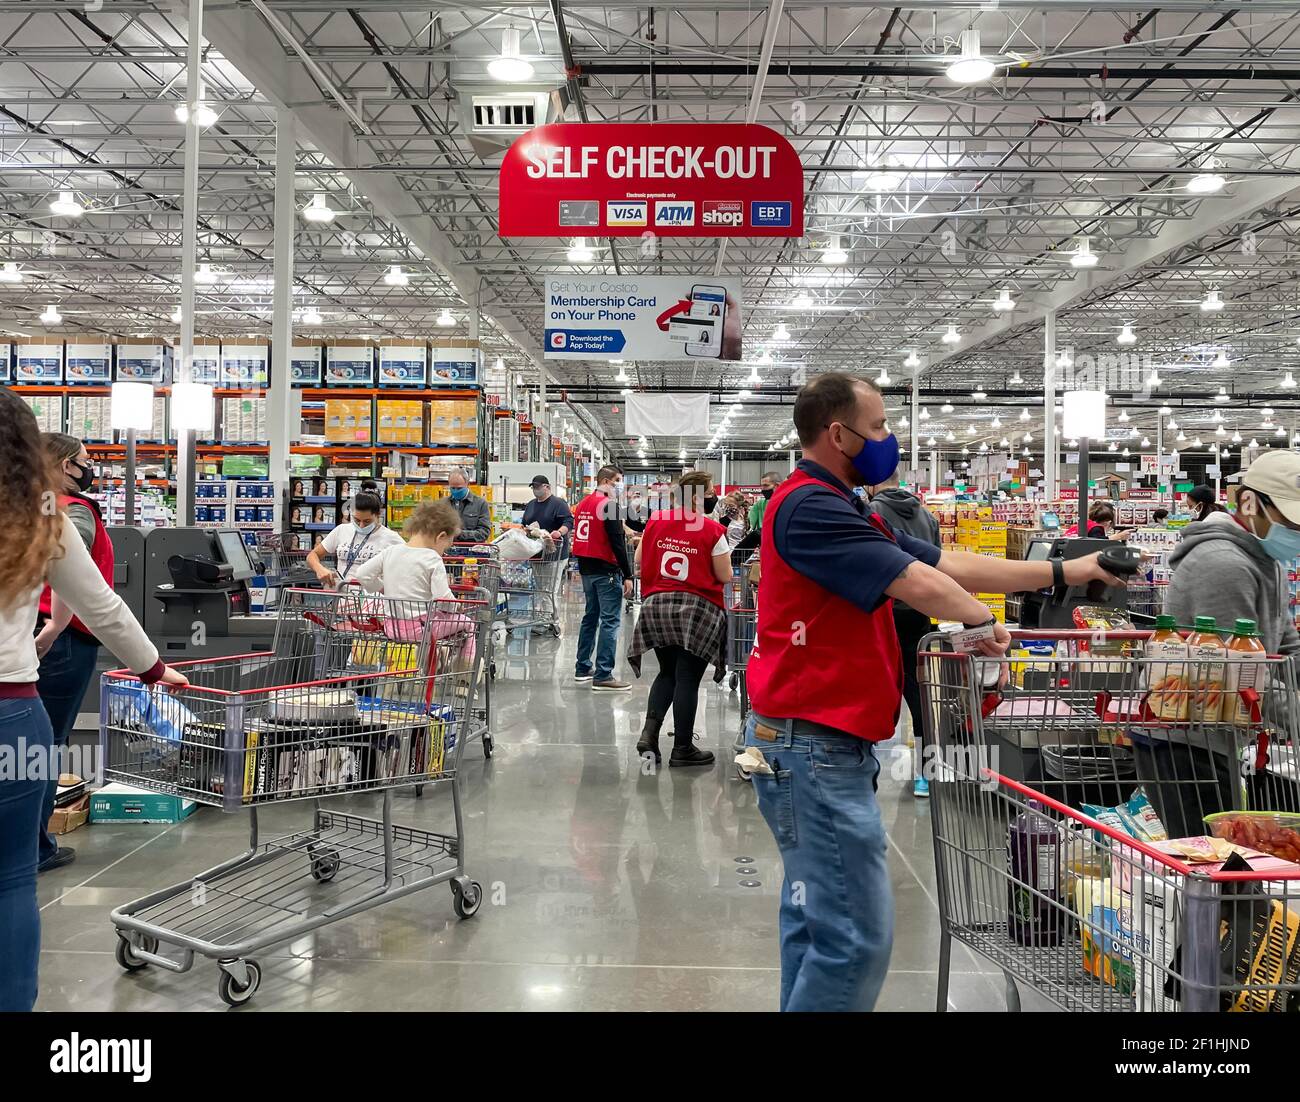 McKinney, TX USA - February 22, 2021: Costco employees helping customers to check out at a new opened self check-out area in McKinney location Stock Photo